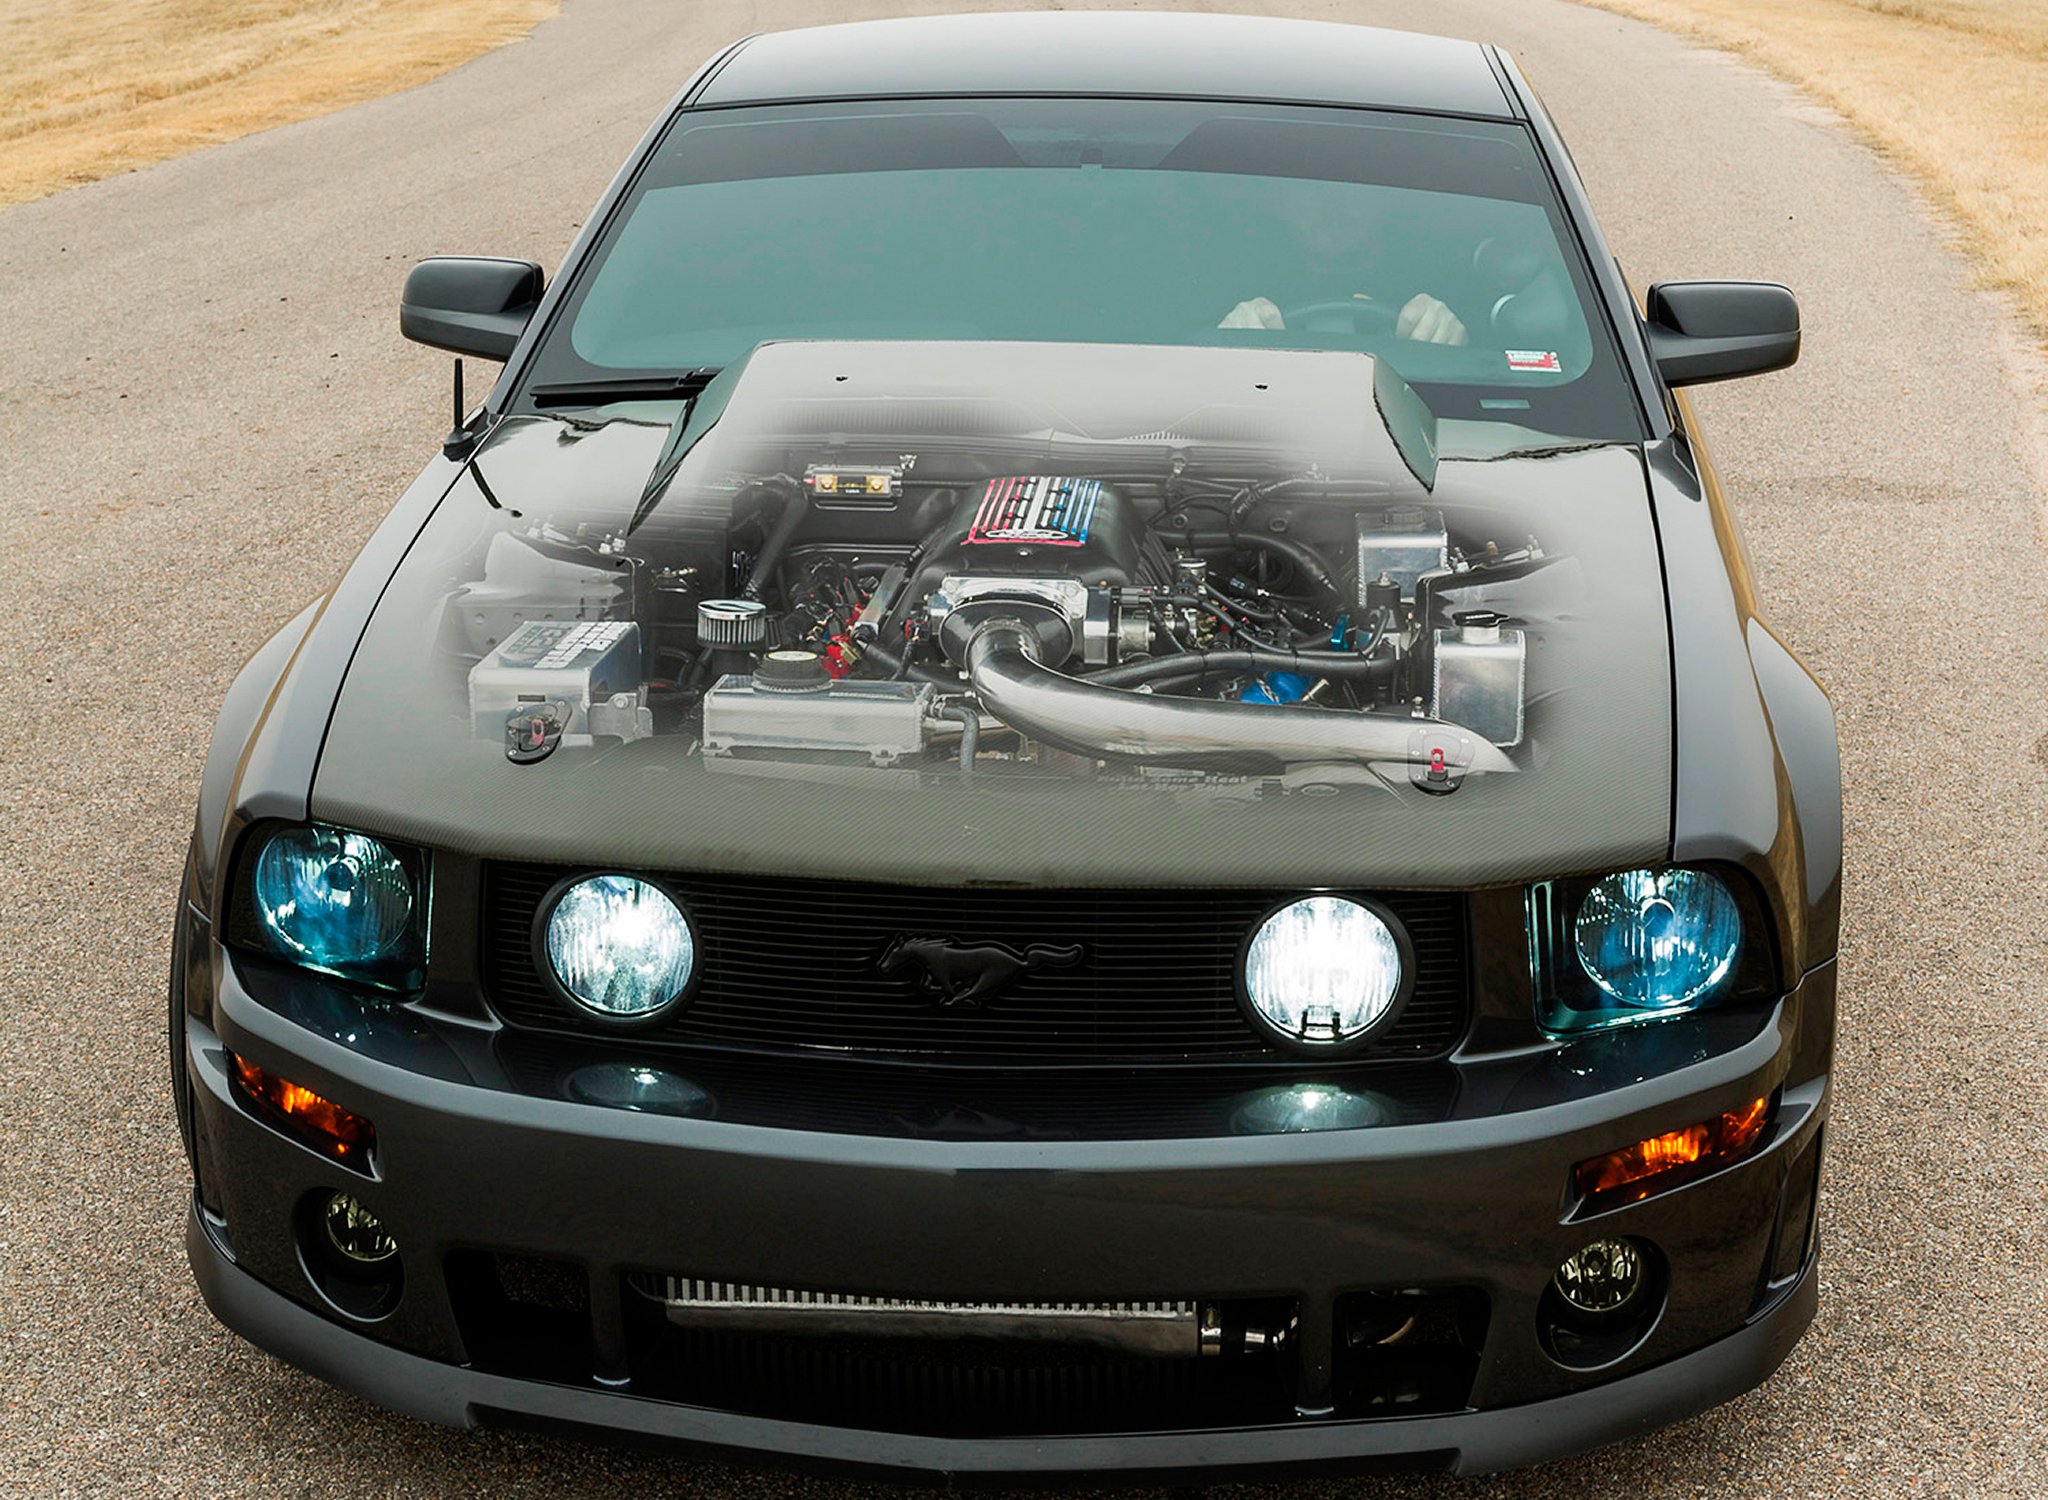 2007, Ford, Mustang, Gt, Pro, Street, Super, Drag, Muscle, Usa, 2048x1360 01 Wallpaper